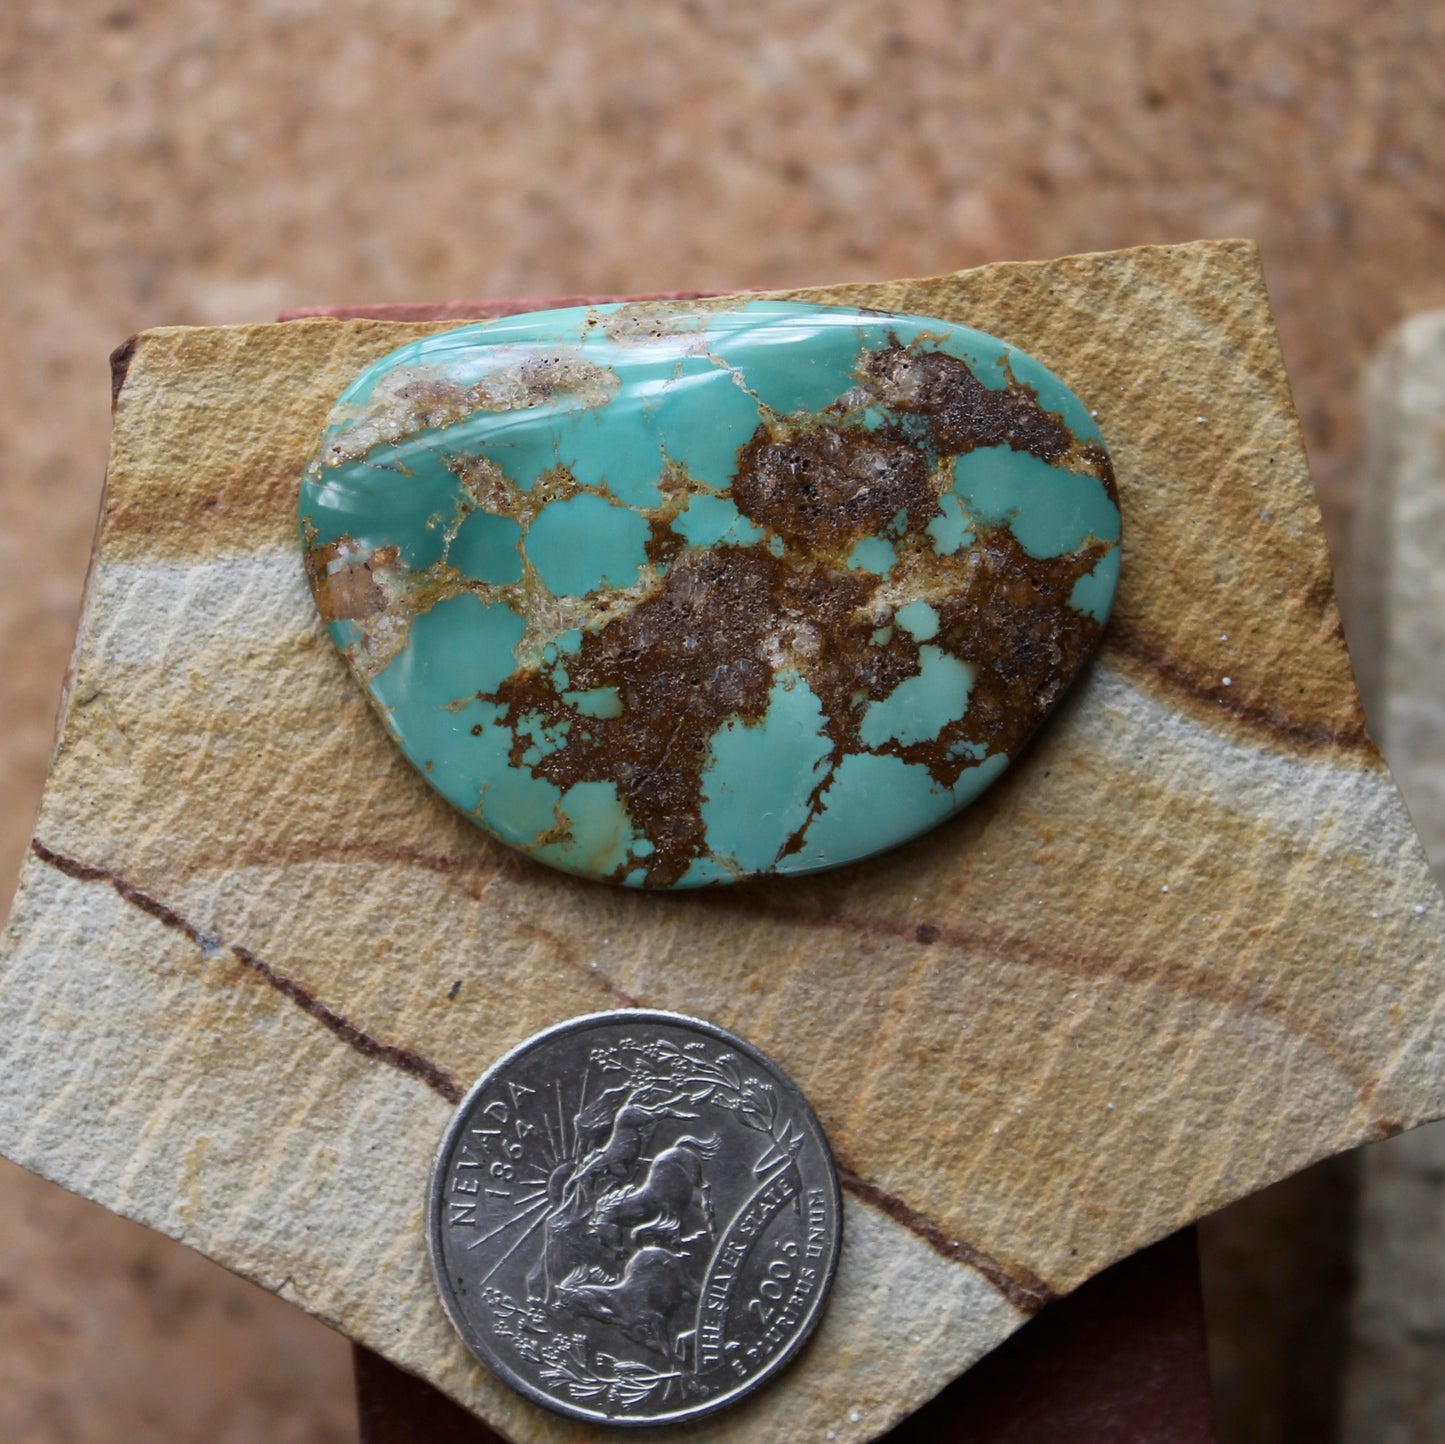 64 carat teal cabochon from Stone Mountain Mine